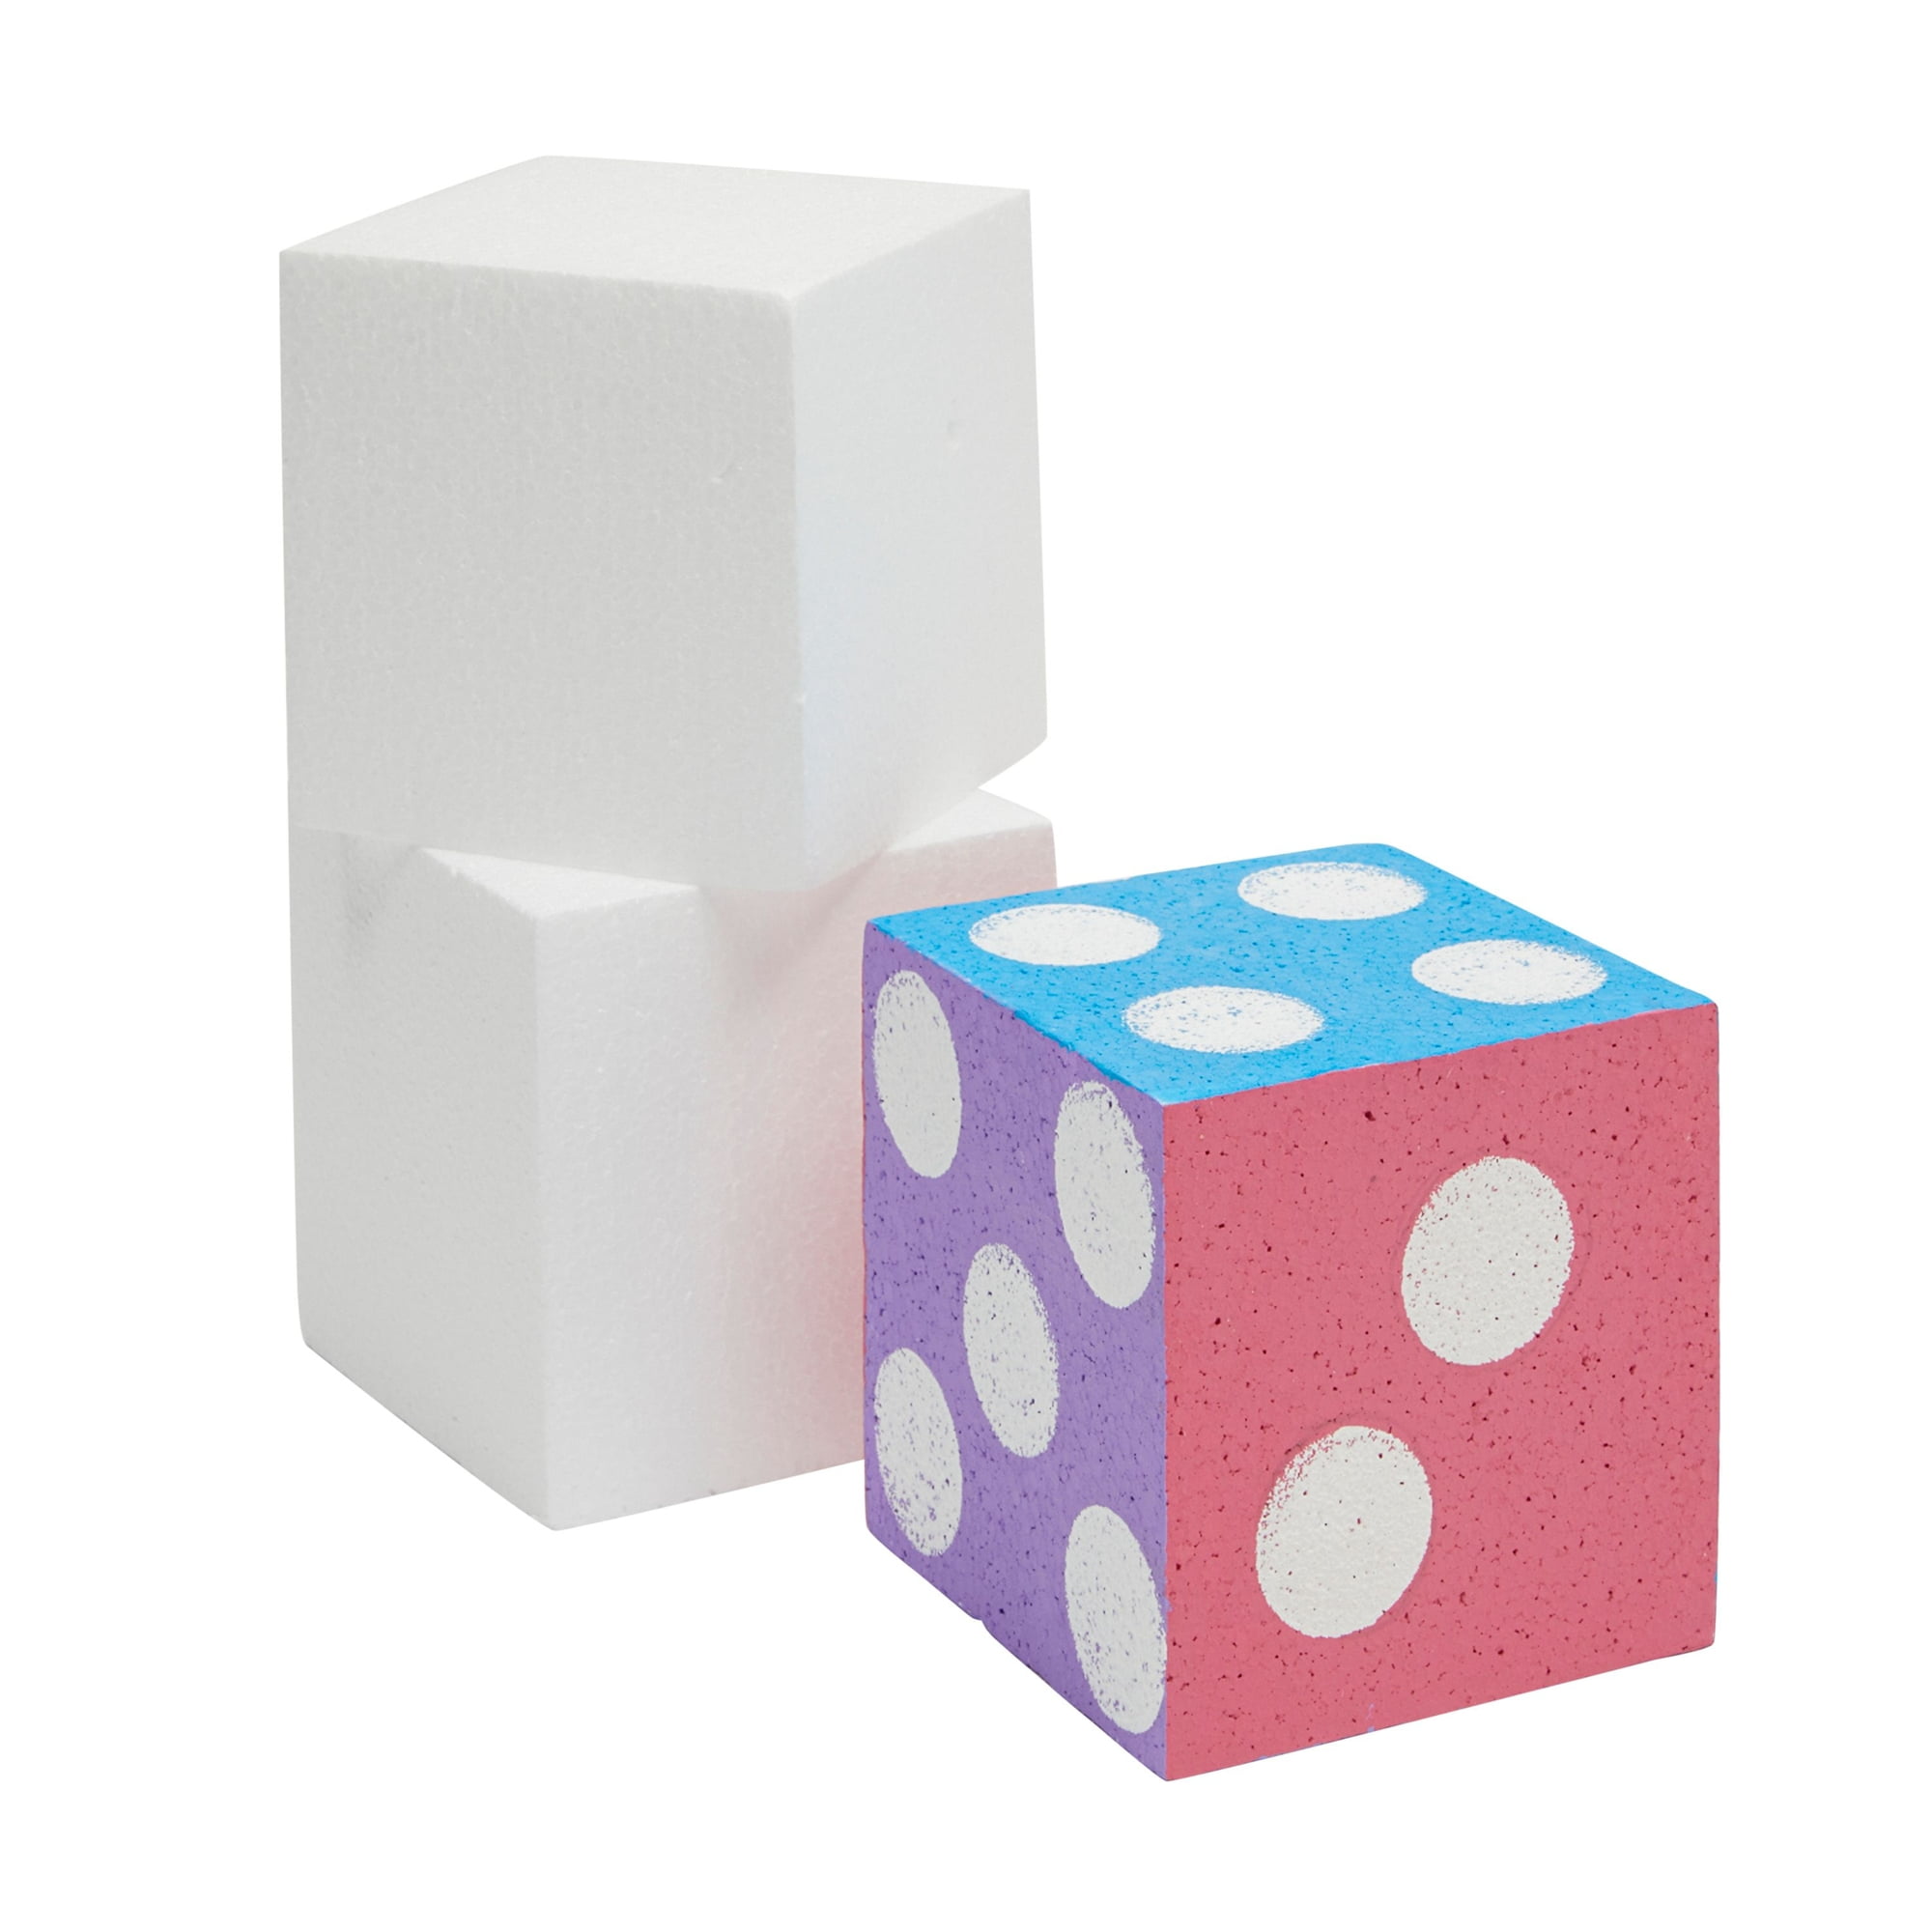 Genie Crafts 36 Pack Blank Foam Cubes and Square Blocks for Crafts